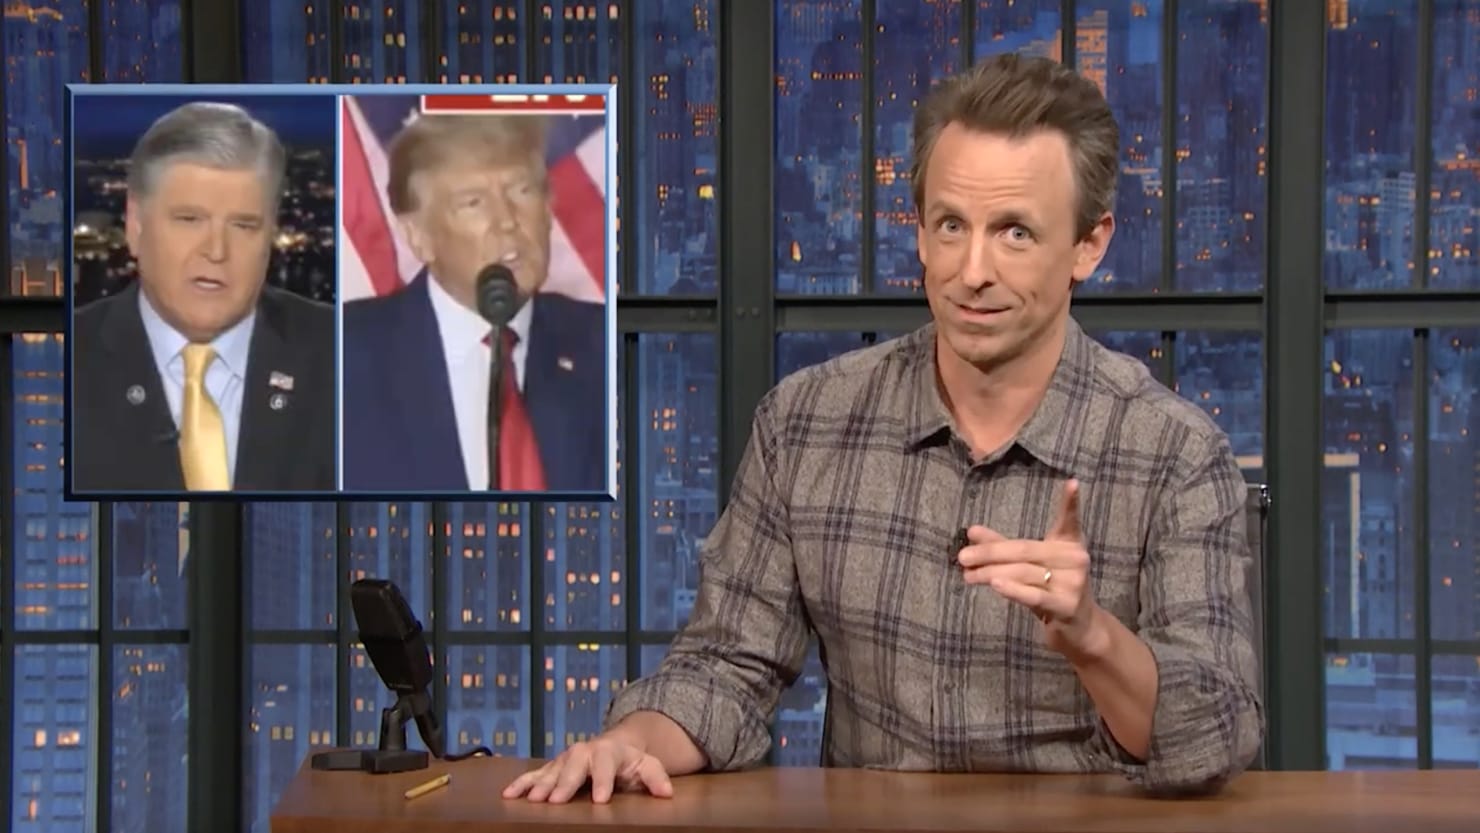 Seth Meyers Mocks Donald Trump for Getting Snubbed by Fox News During